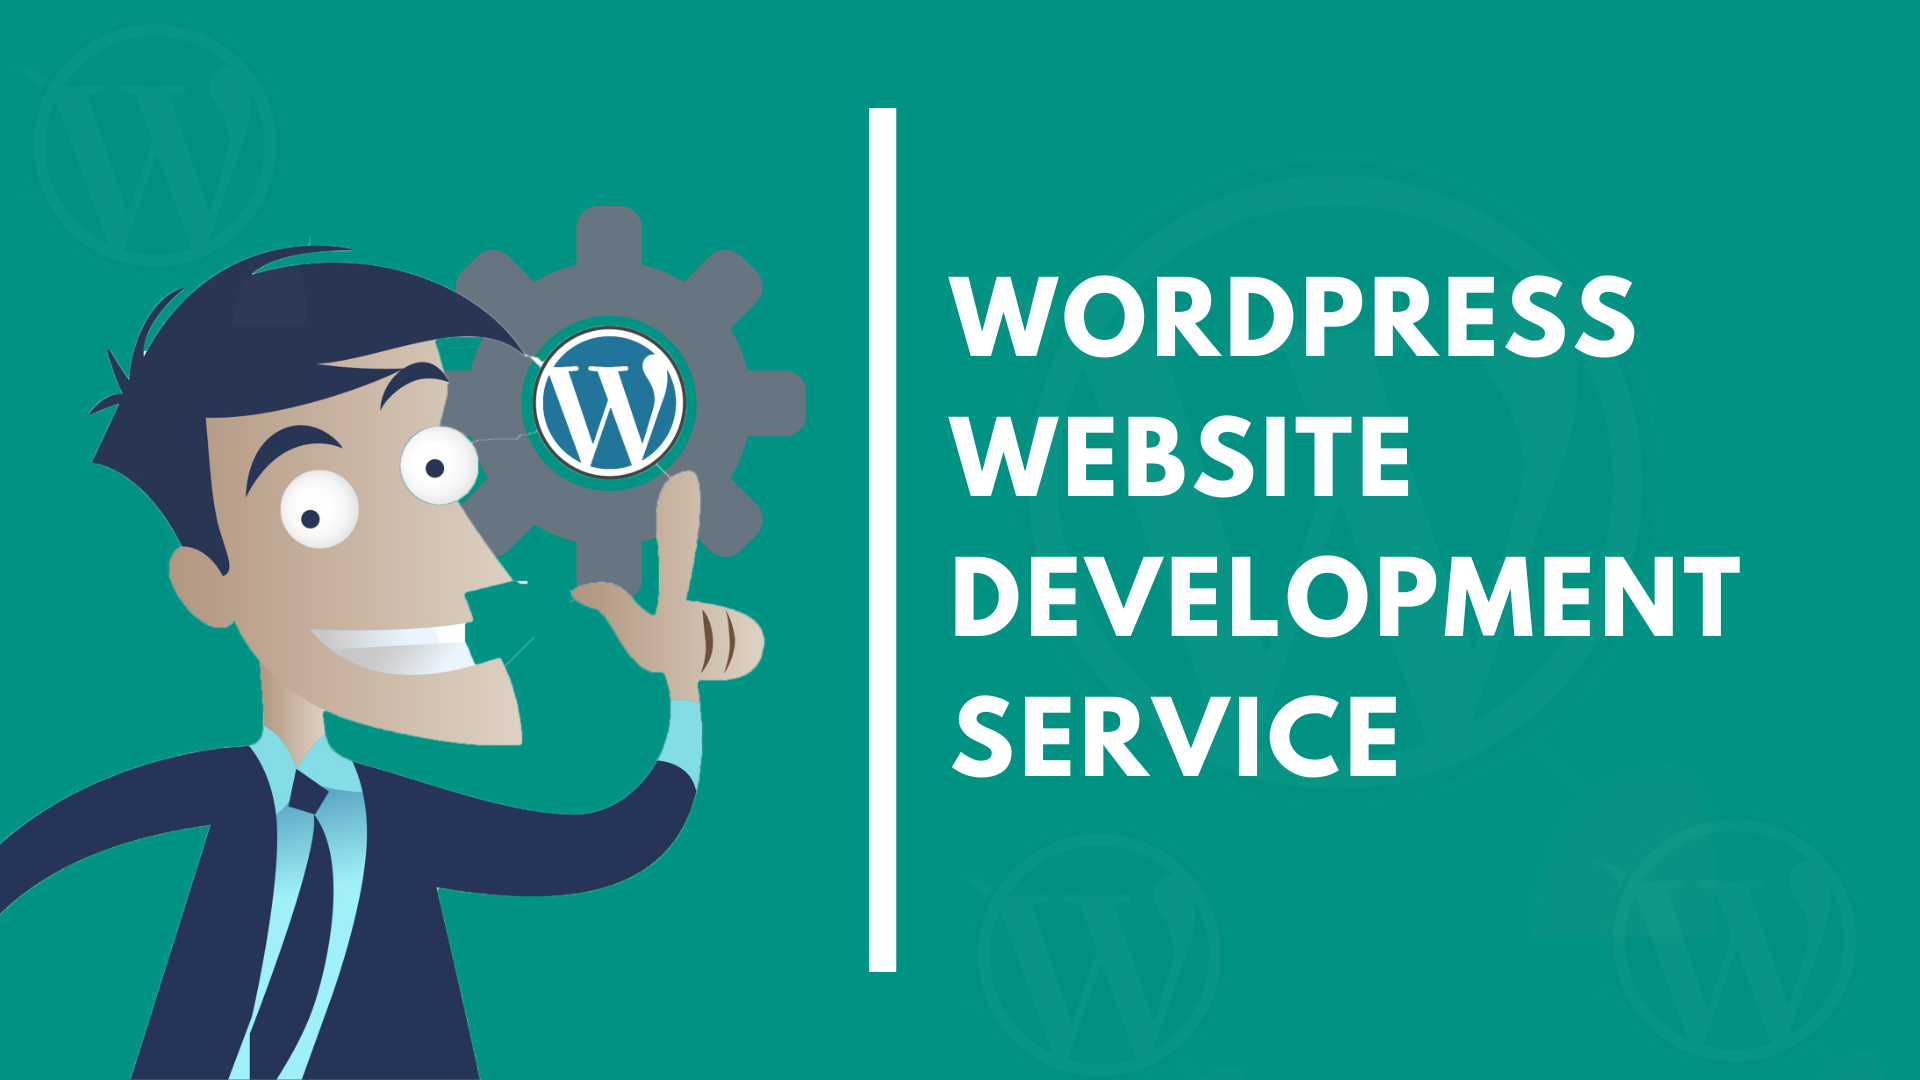 Are you looking for WordPress Website Development Service?